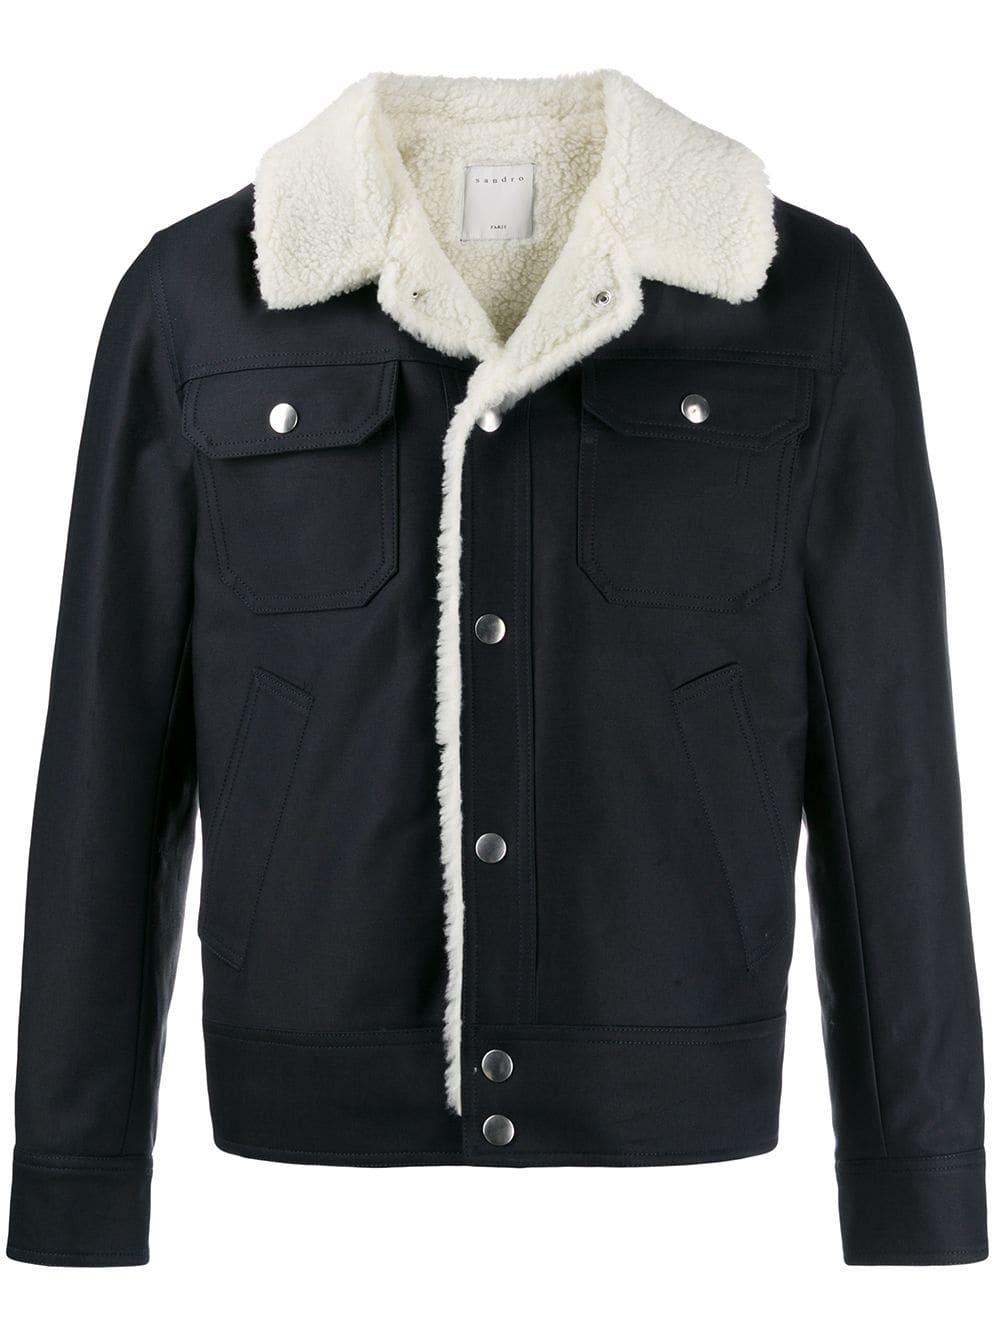 Sandro Cotton Shearling Jacket in Blue for Men - Lyst